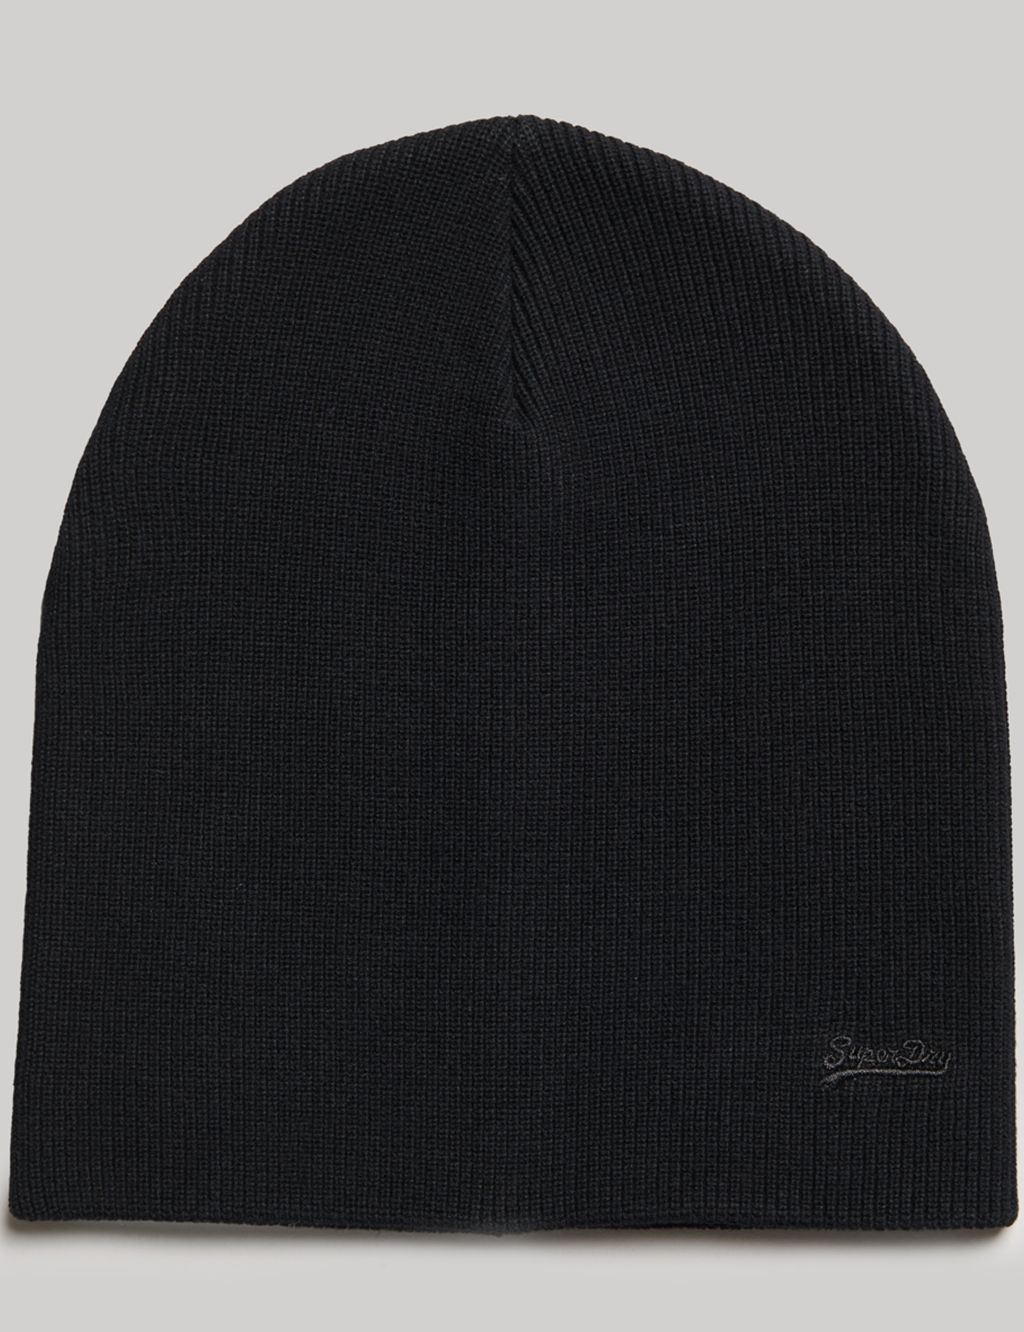 Pure Cotton Knitted Beanie Hat image 3